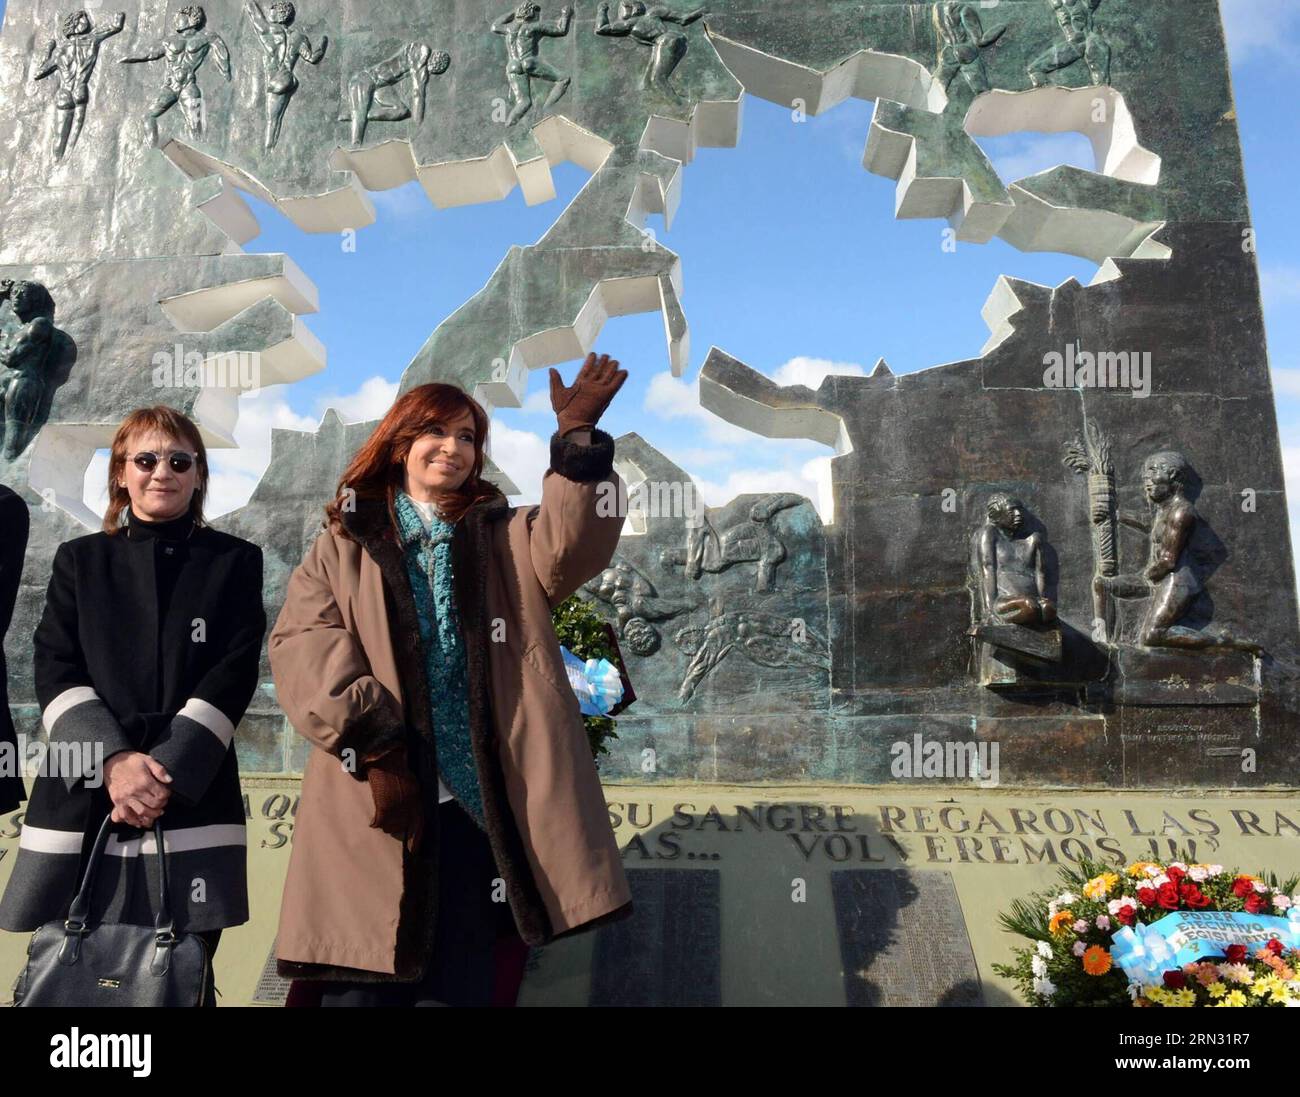 Argentina s President Cristina Fernandez de Kirchner (R) takes part in an event to mark the 33rd anniversary of the war between Argentina and the United Kingdom, in Malvinas Square, in Ushuaia, Argentina, on April 2, 2015. Presidencia/) ARGENTINA-USHUAIA-POLITICS-ANNIVERSARY TELAM PUBLICATIONxNOTxINxCHN   Argentina S President Cristina Fernandez de Kirchner r Takes Part in to Event to Mark The 33rd Anniversary of The was between Argentina and The United Kingdom in Malvinas Square in Ushuaia Argentina ON April 2 2015 Presidencia Argentina Ushuaia POLITICS Anniversary Telam PUBLICATIONxNOTxINxCH Stock Photo